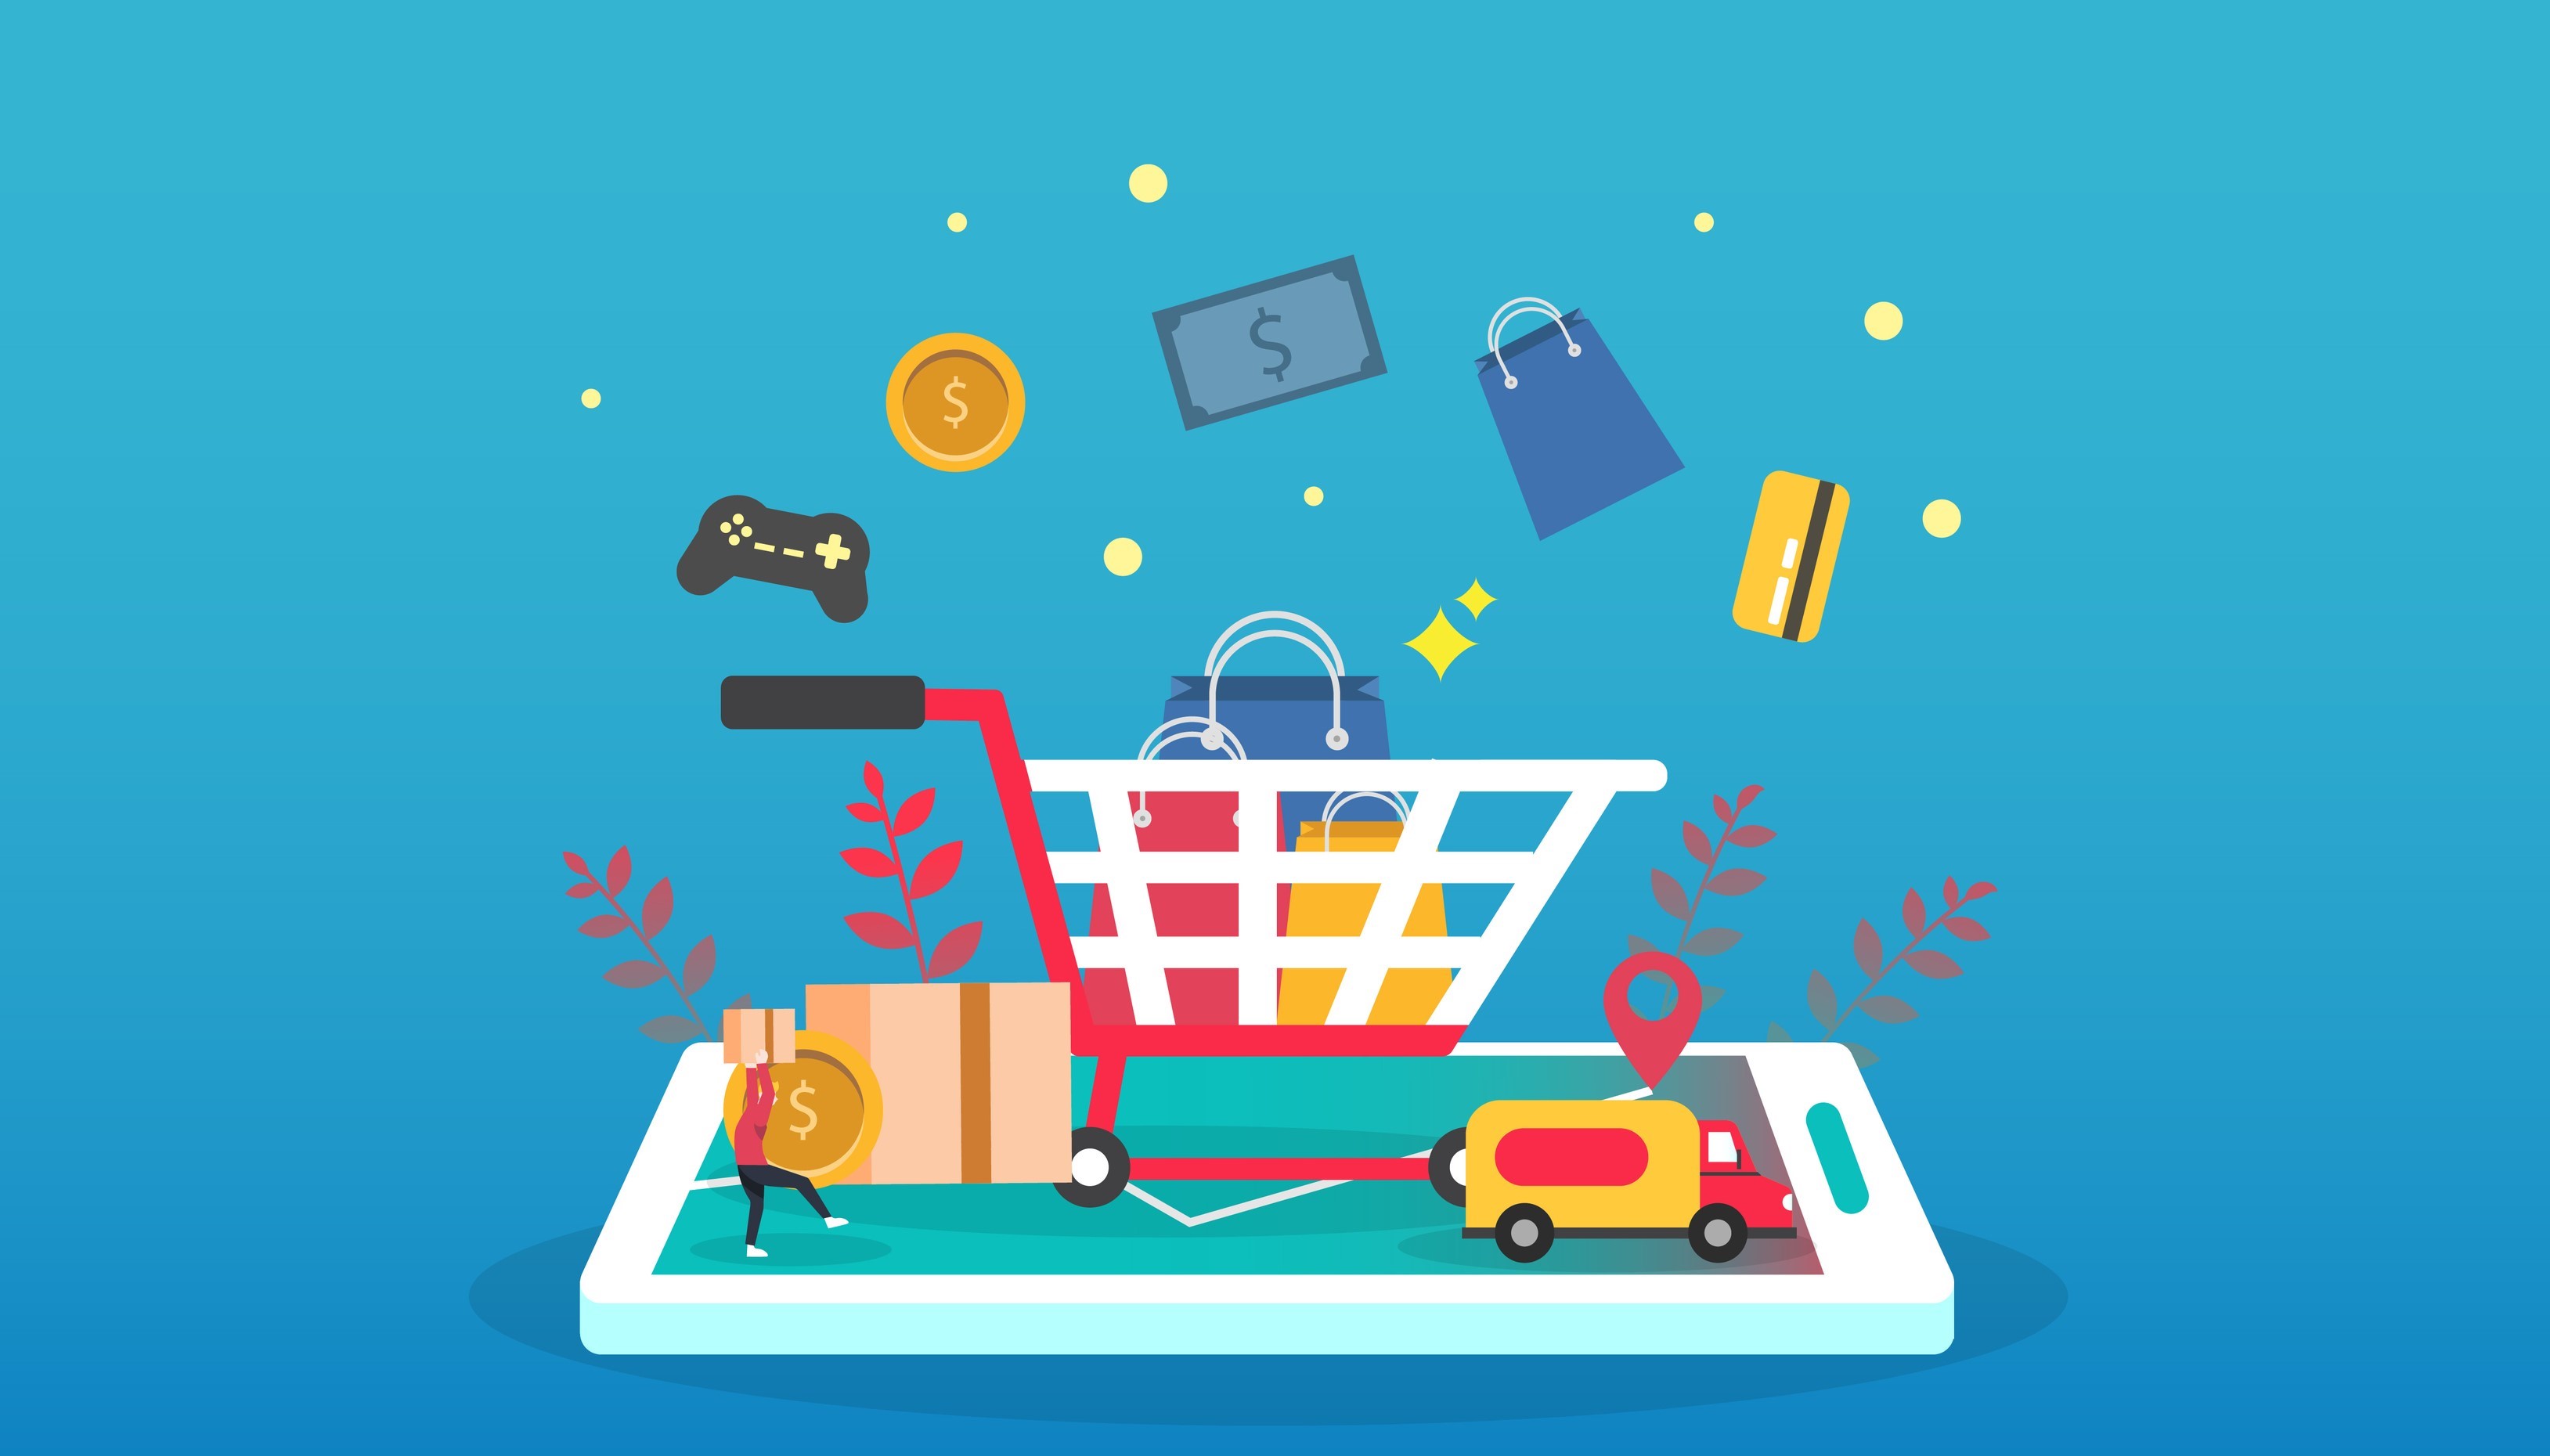 Graphic image showing a cell phone, a shopping cart and other shopping icons.